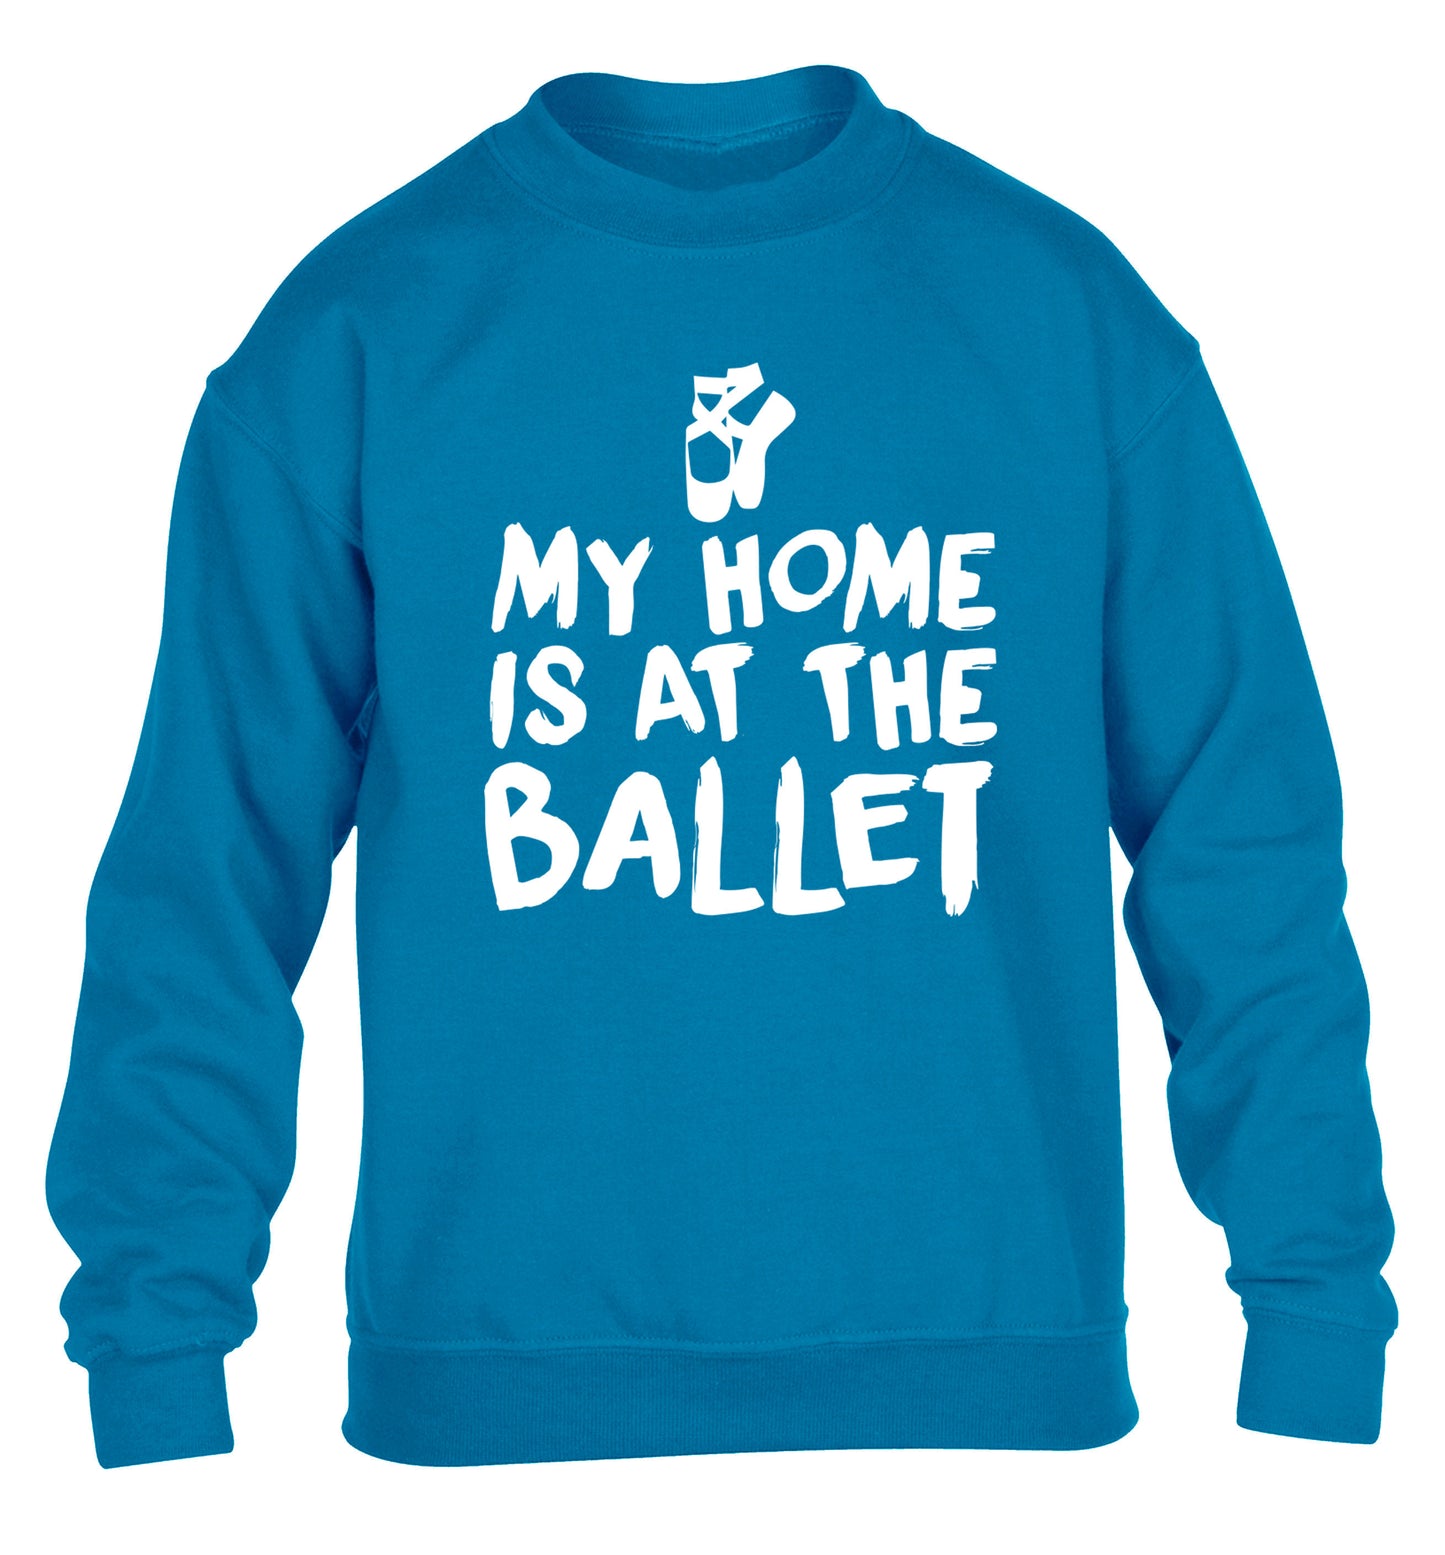 My home is at the ballet children's blue sweater 12-14 Years